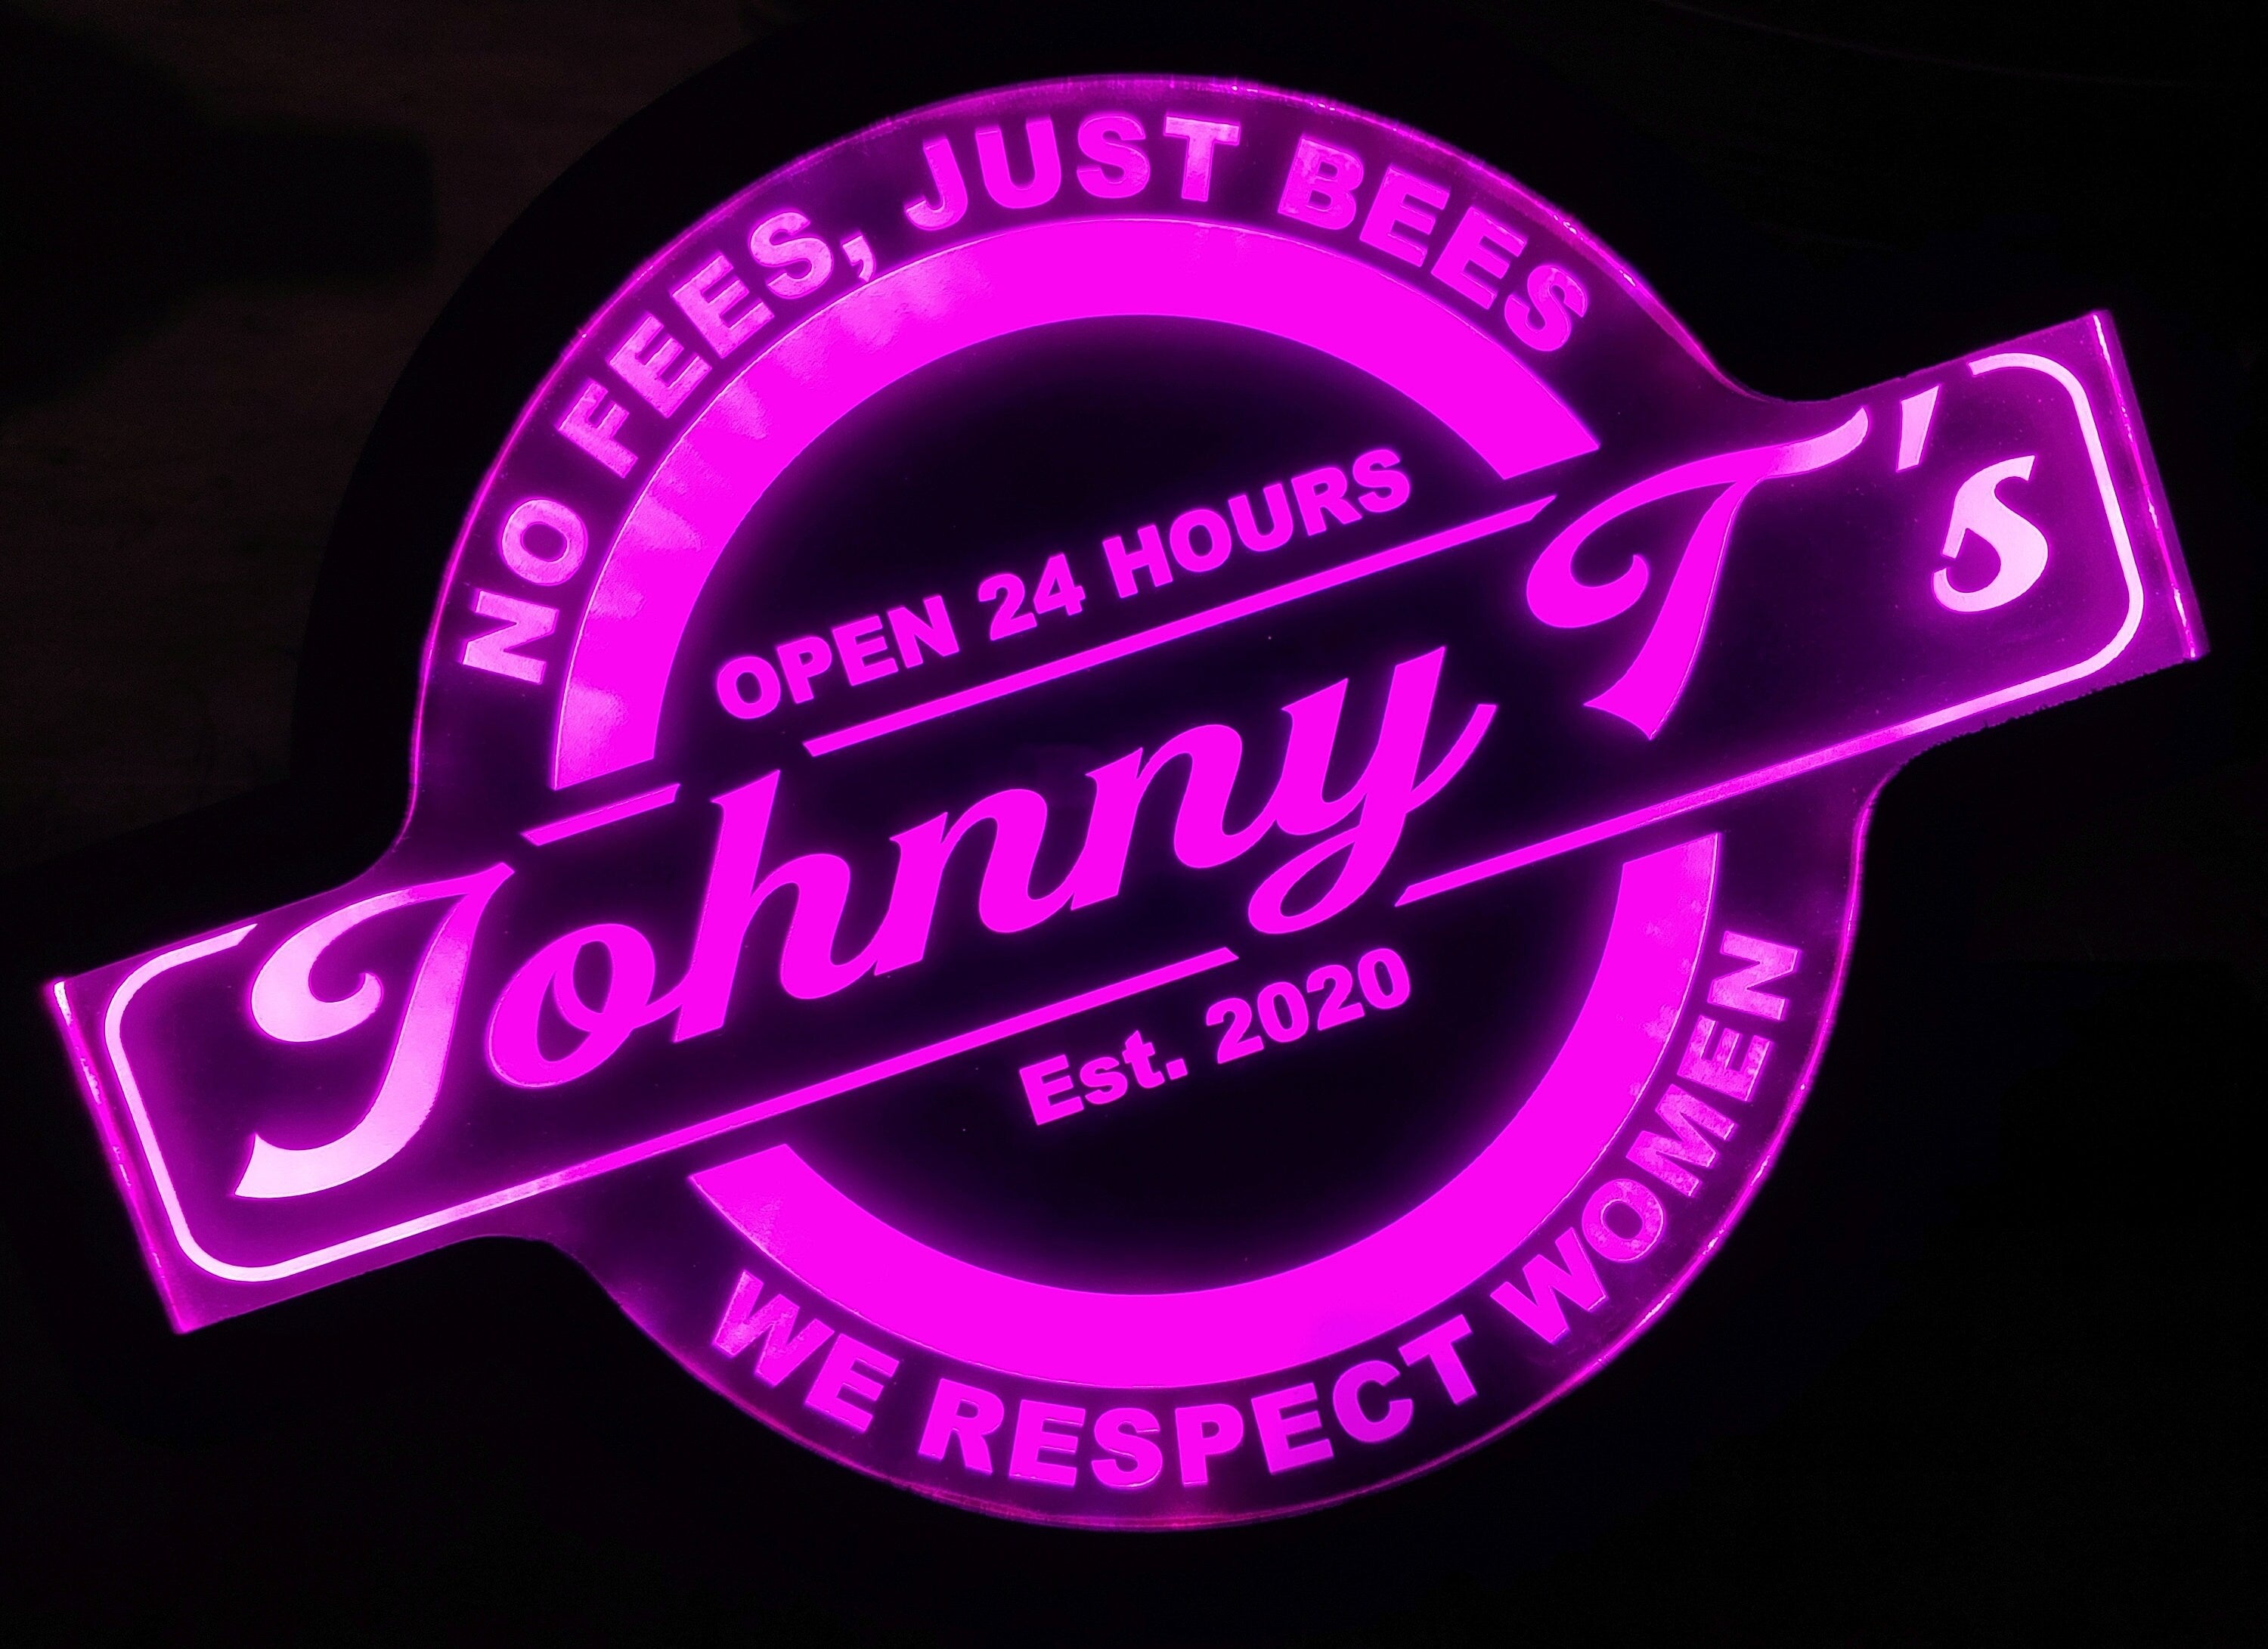 Custom Sign Bar, Place, Hideout or Man Cave Led Wall Sign Neon Like - Color Changing Remote Control - 4 Sizes Free Shipping